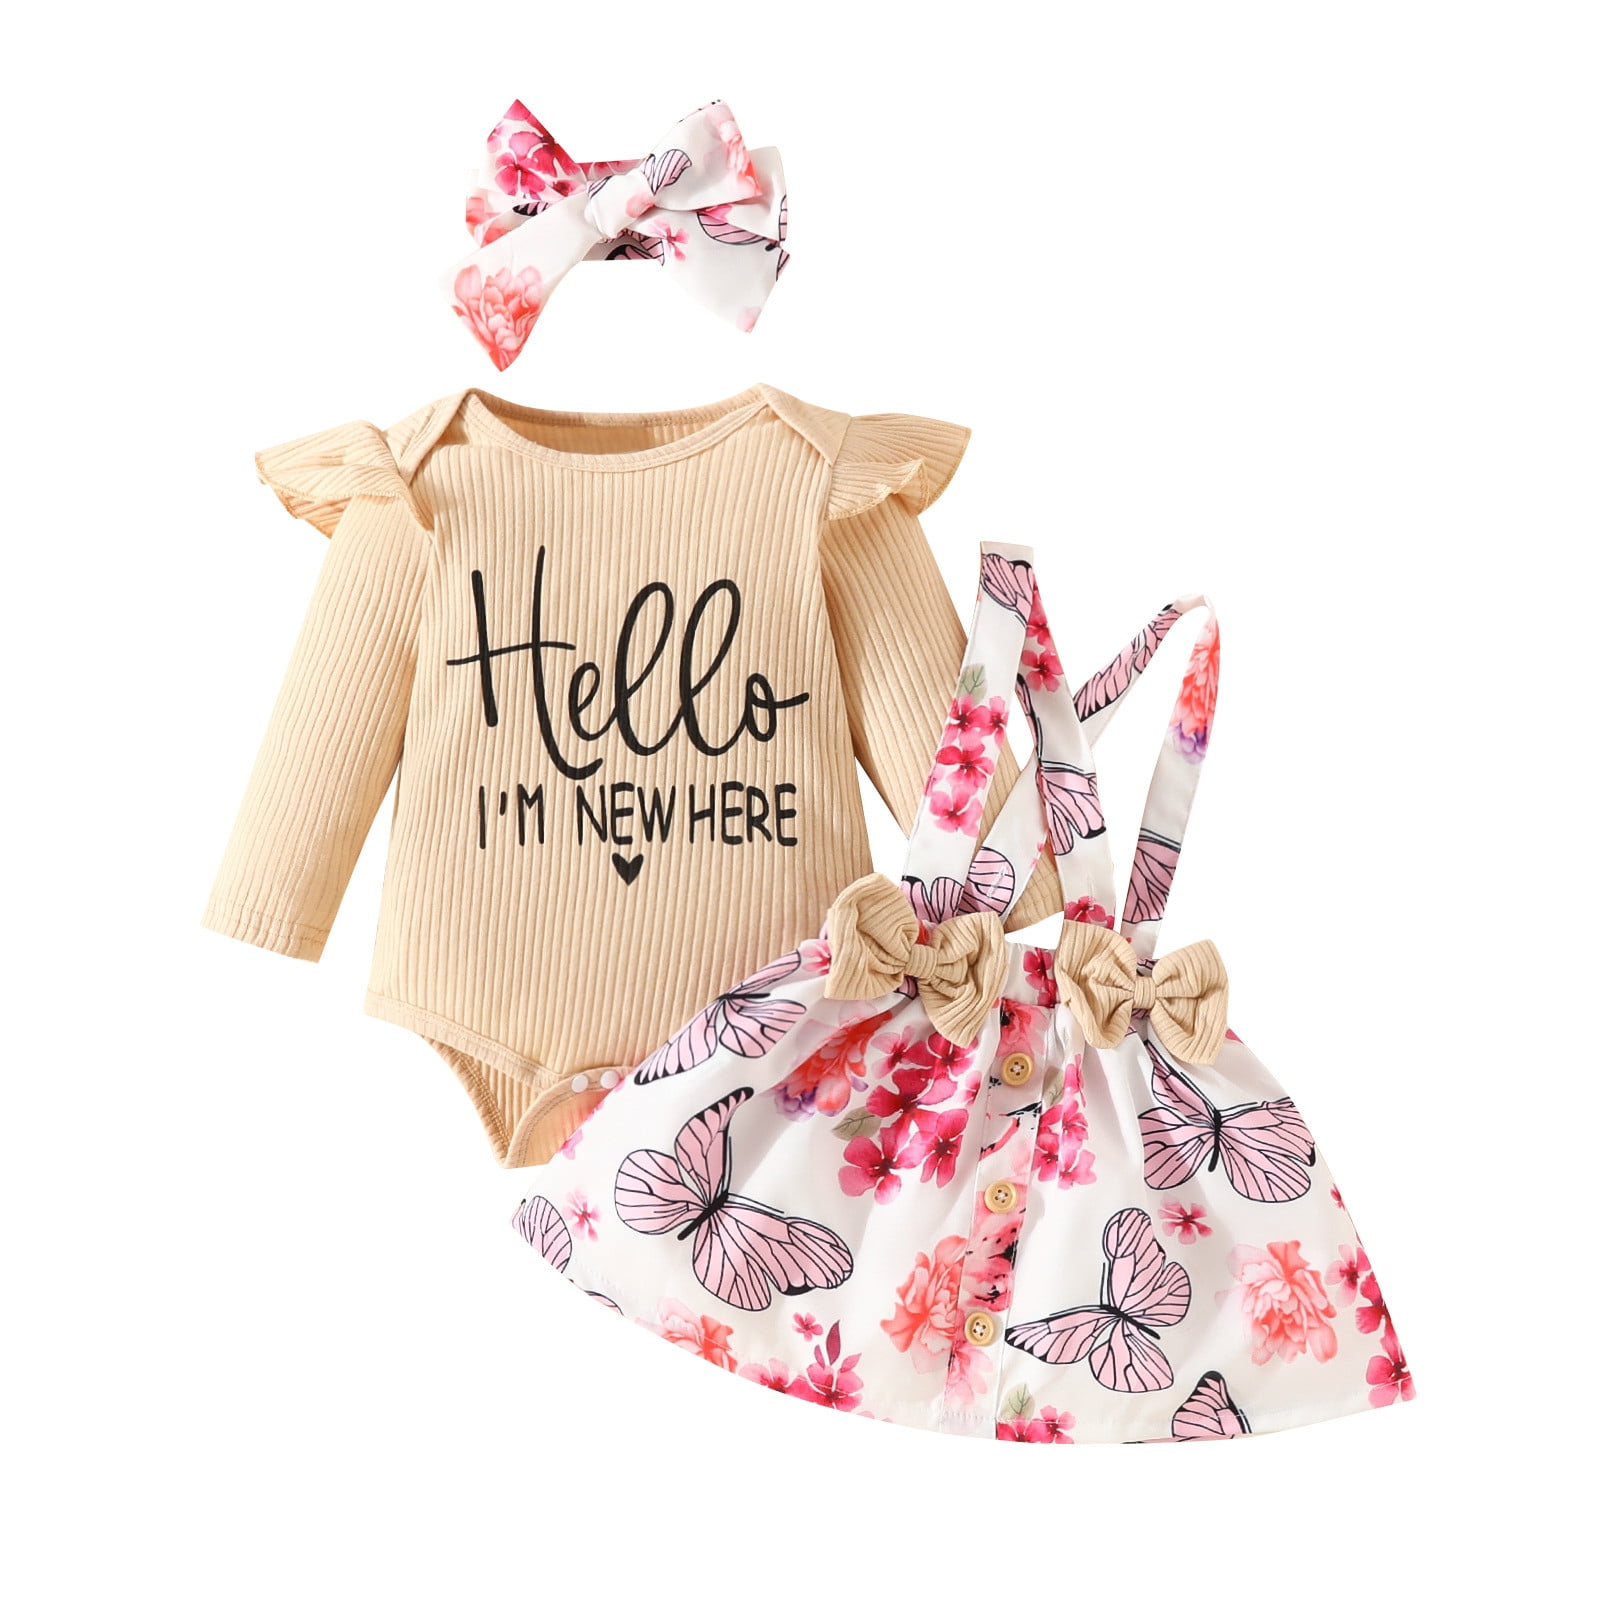 ZCFZJW Hello, I'm New Here Toddler Baby Boys Girls 3 Piece Outfits ...